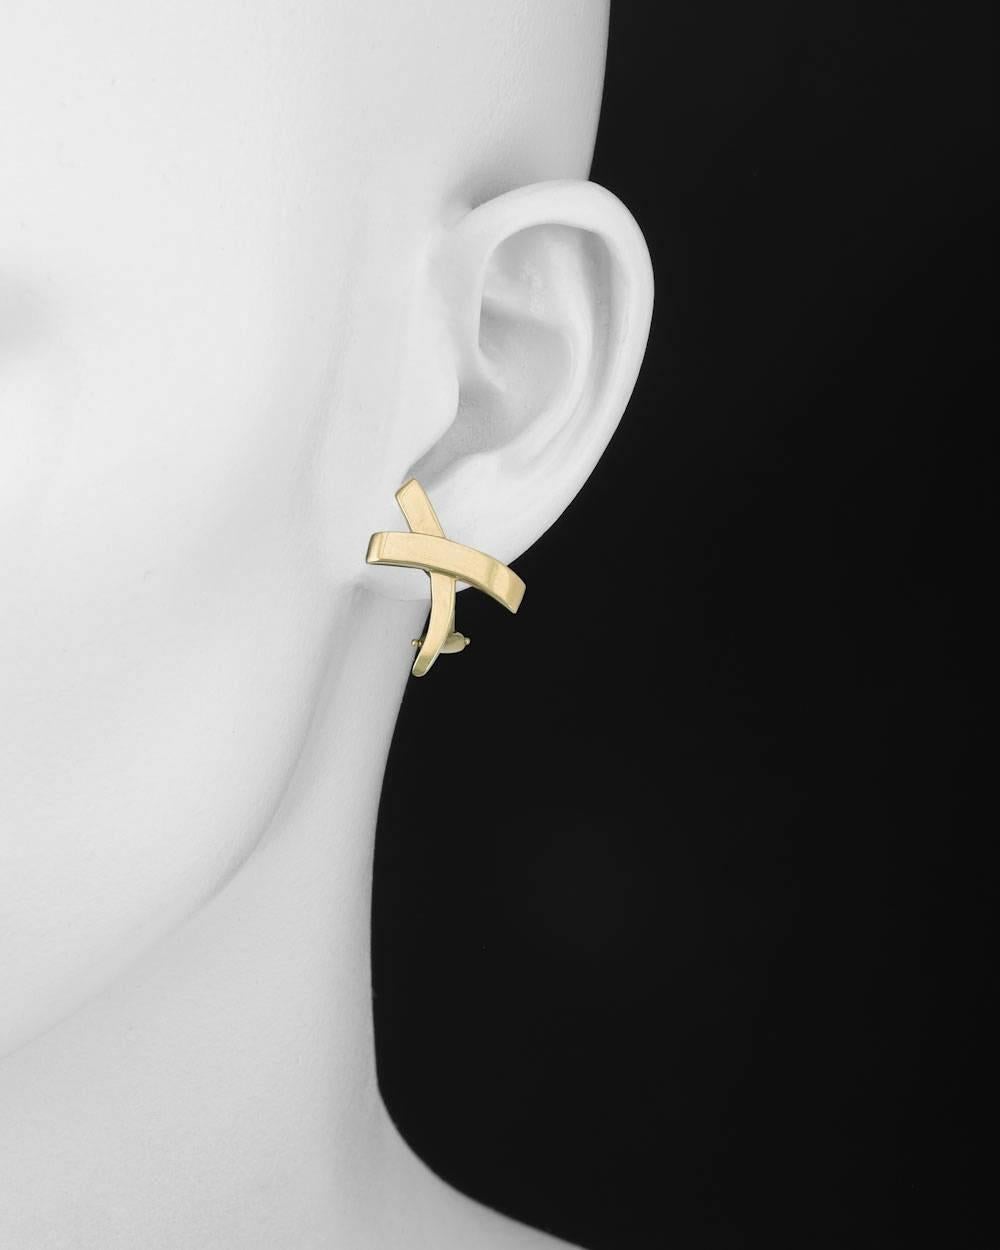 Paloma Picasso 'X' earclips, in polished 18k yellow gold, signed Tiffany & Co. Omega-style clip backs with posts. 1" length and 0.7" width at widest point.